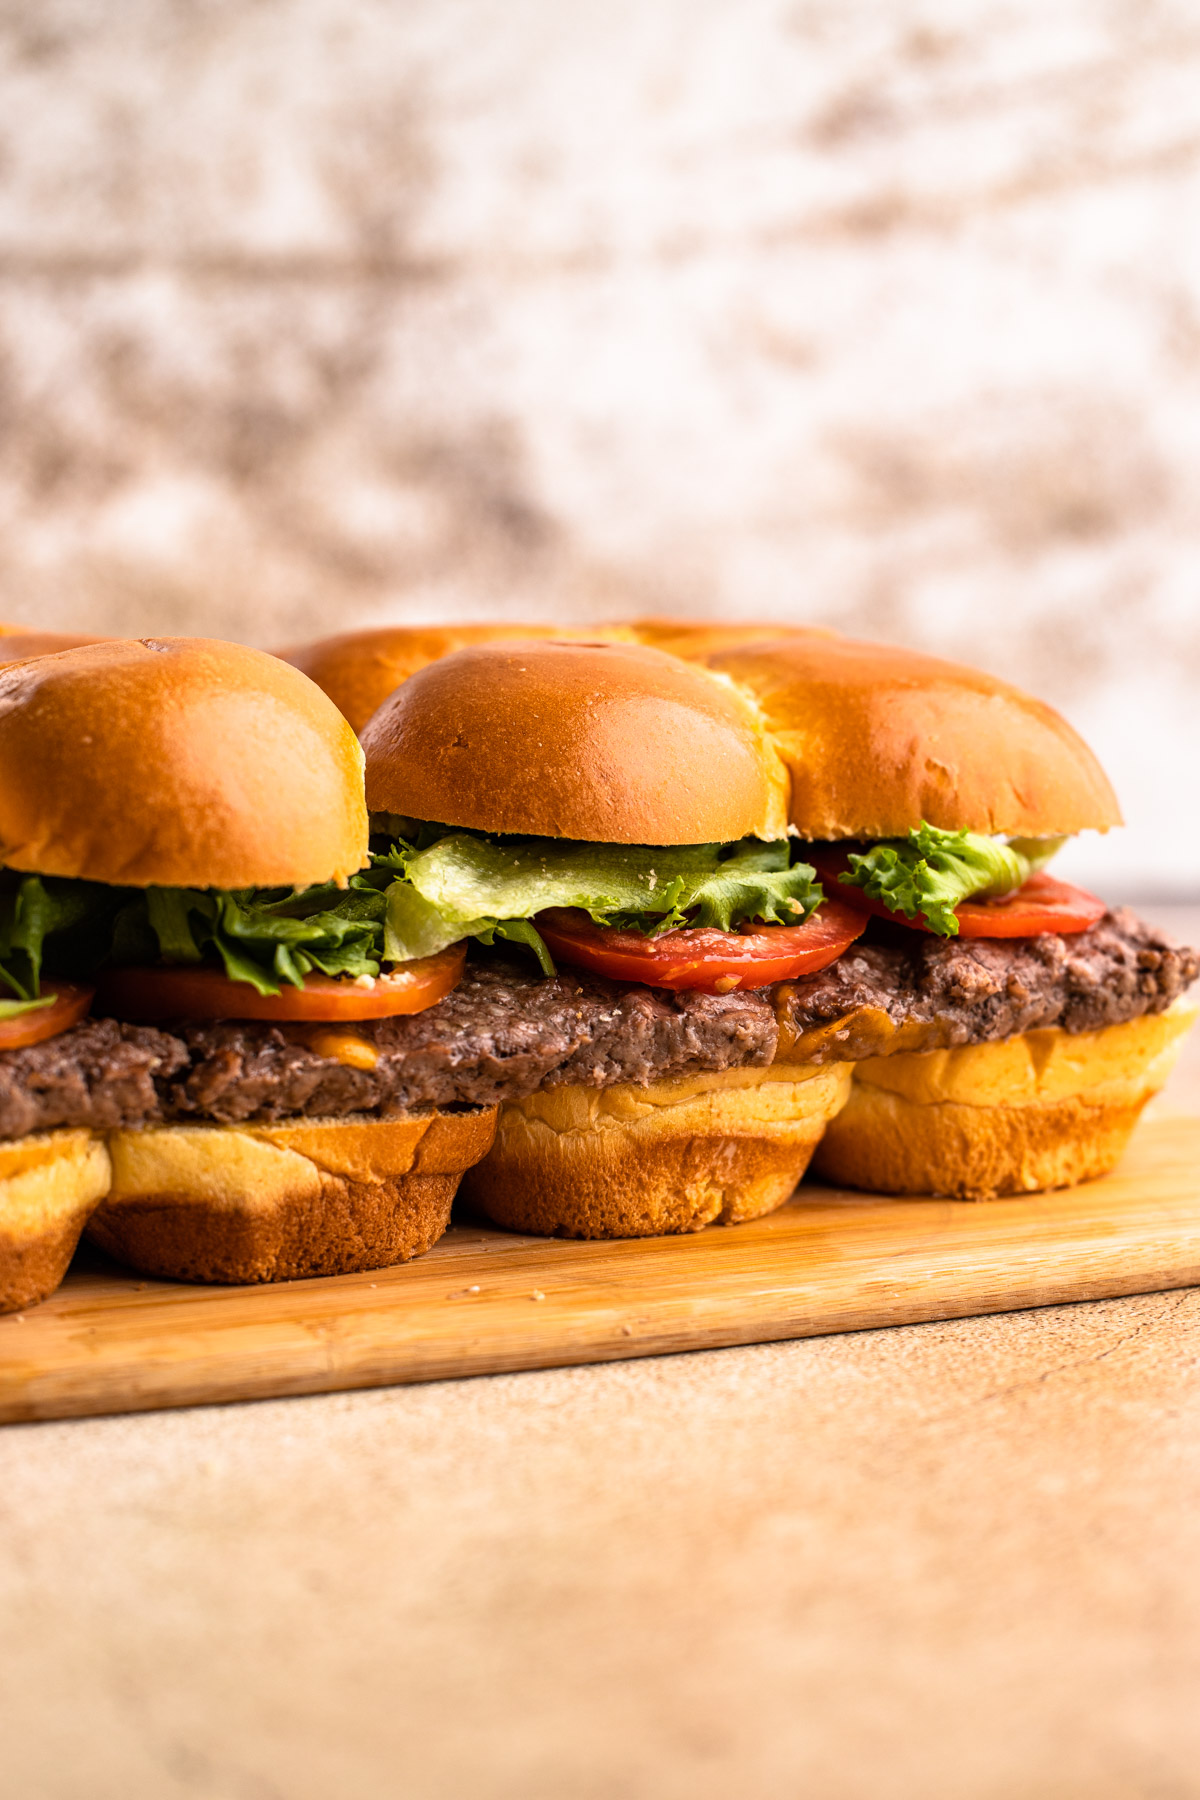 Sheet pan sliders with special sauce, lettuce and tomato.